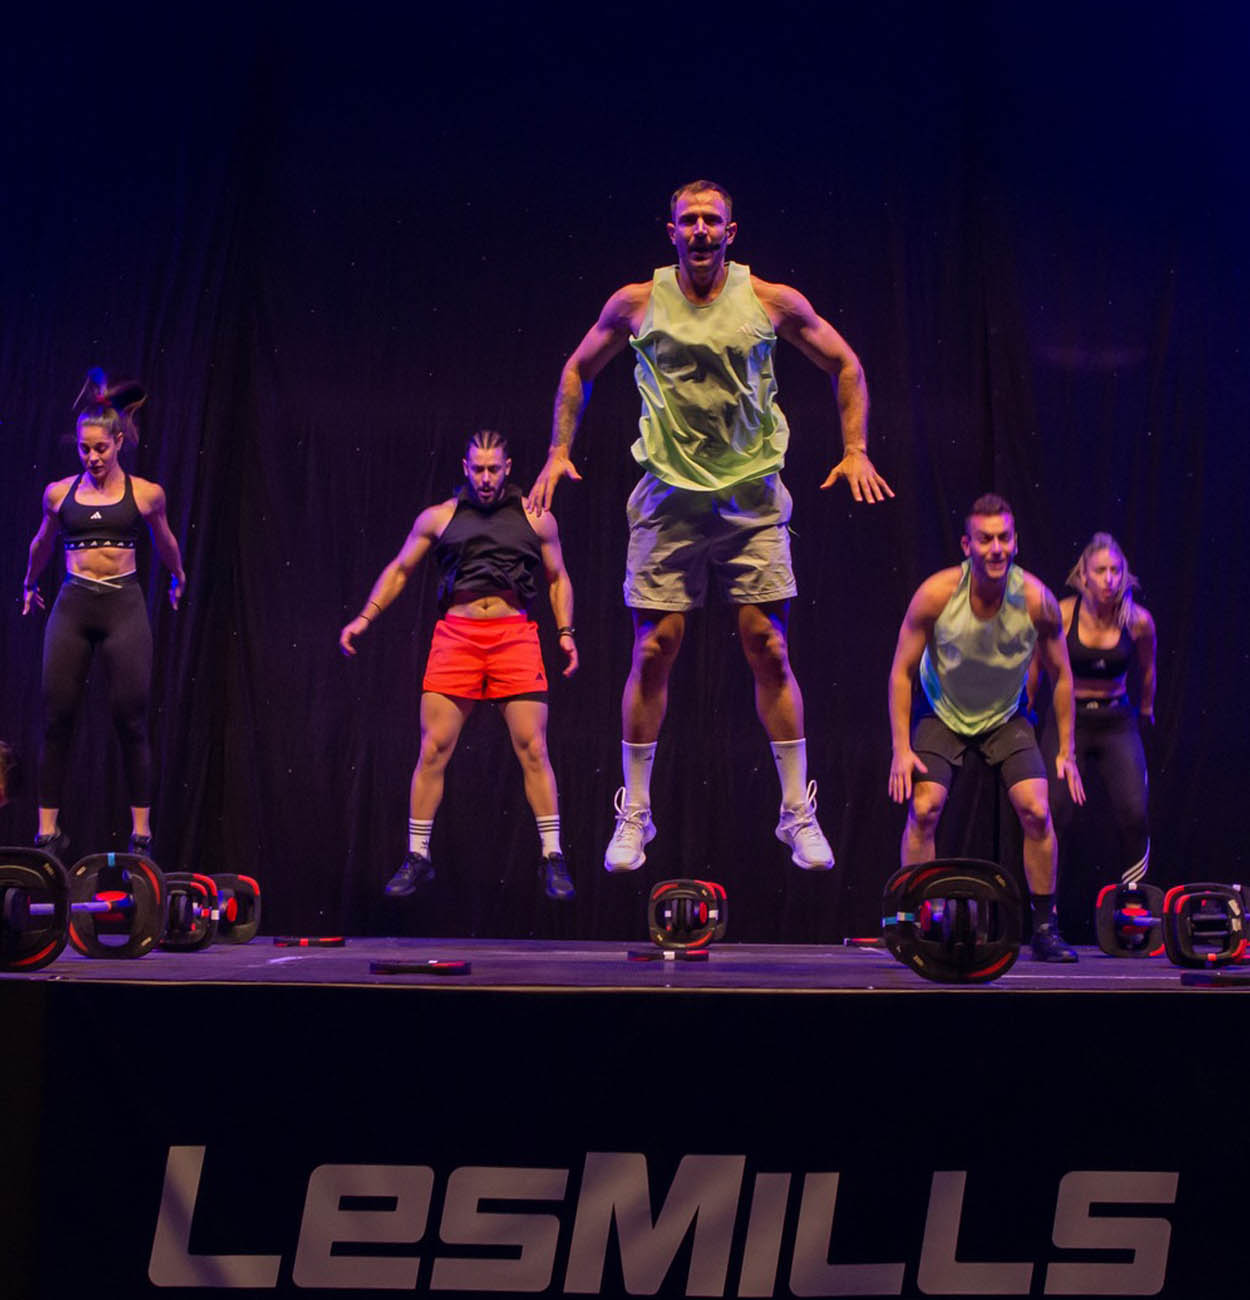 Les Mills -TAKING FITNESS TO THE NEXT LEVEL